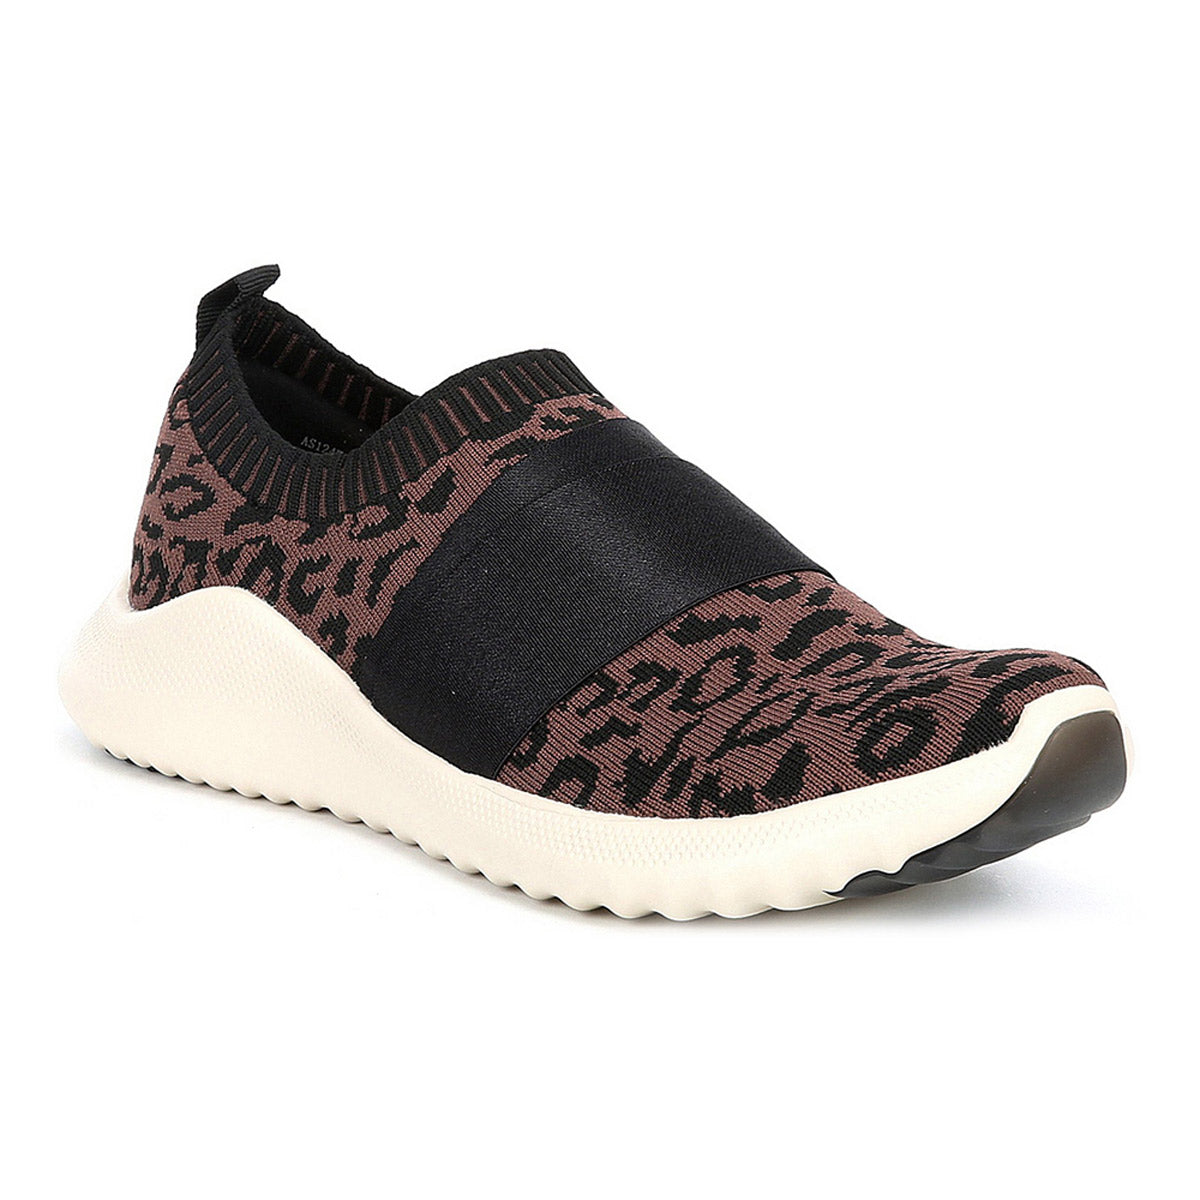 A casual slip-on Aetrex Allie Leopard sneaker with a black and pink leopard patterned design, featuring Lynco® Arch Support for plantar fasciitis relief.